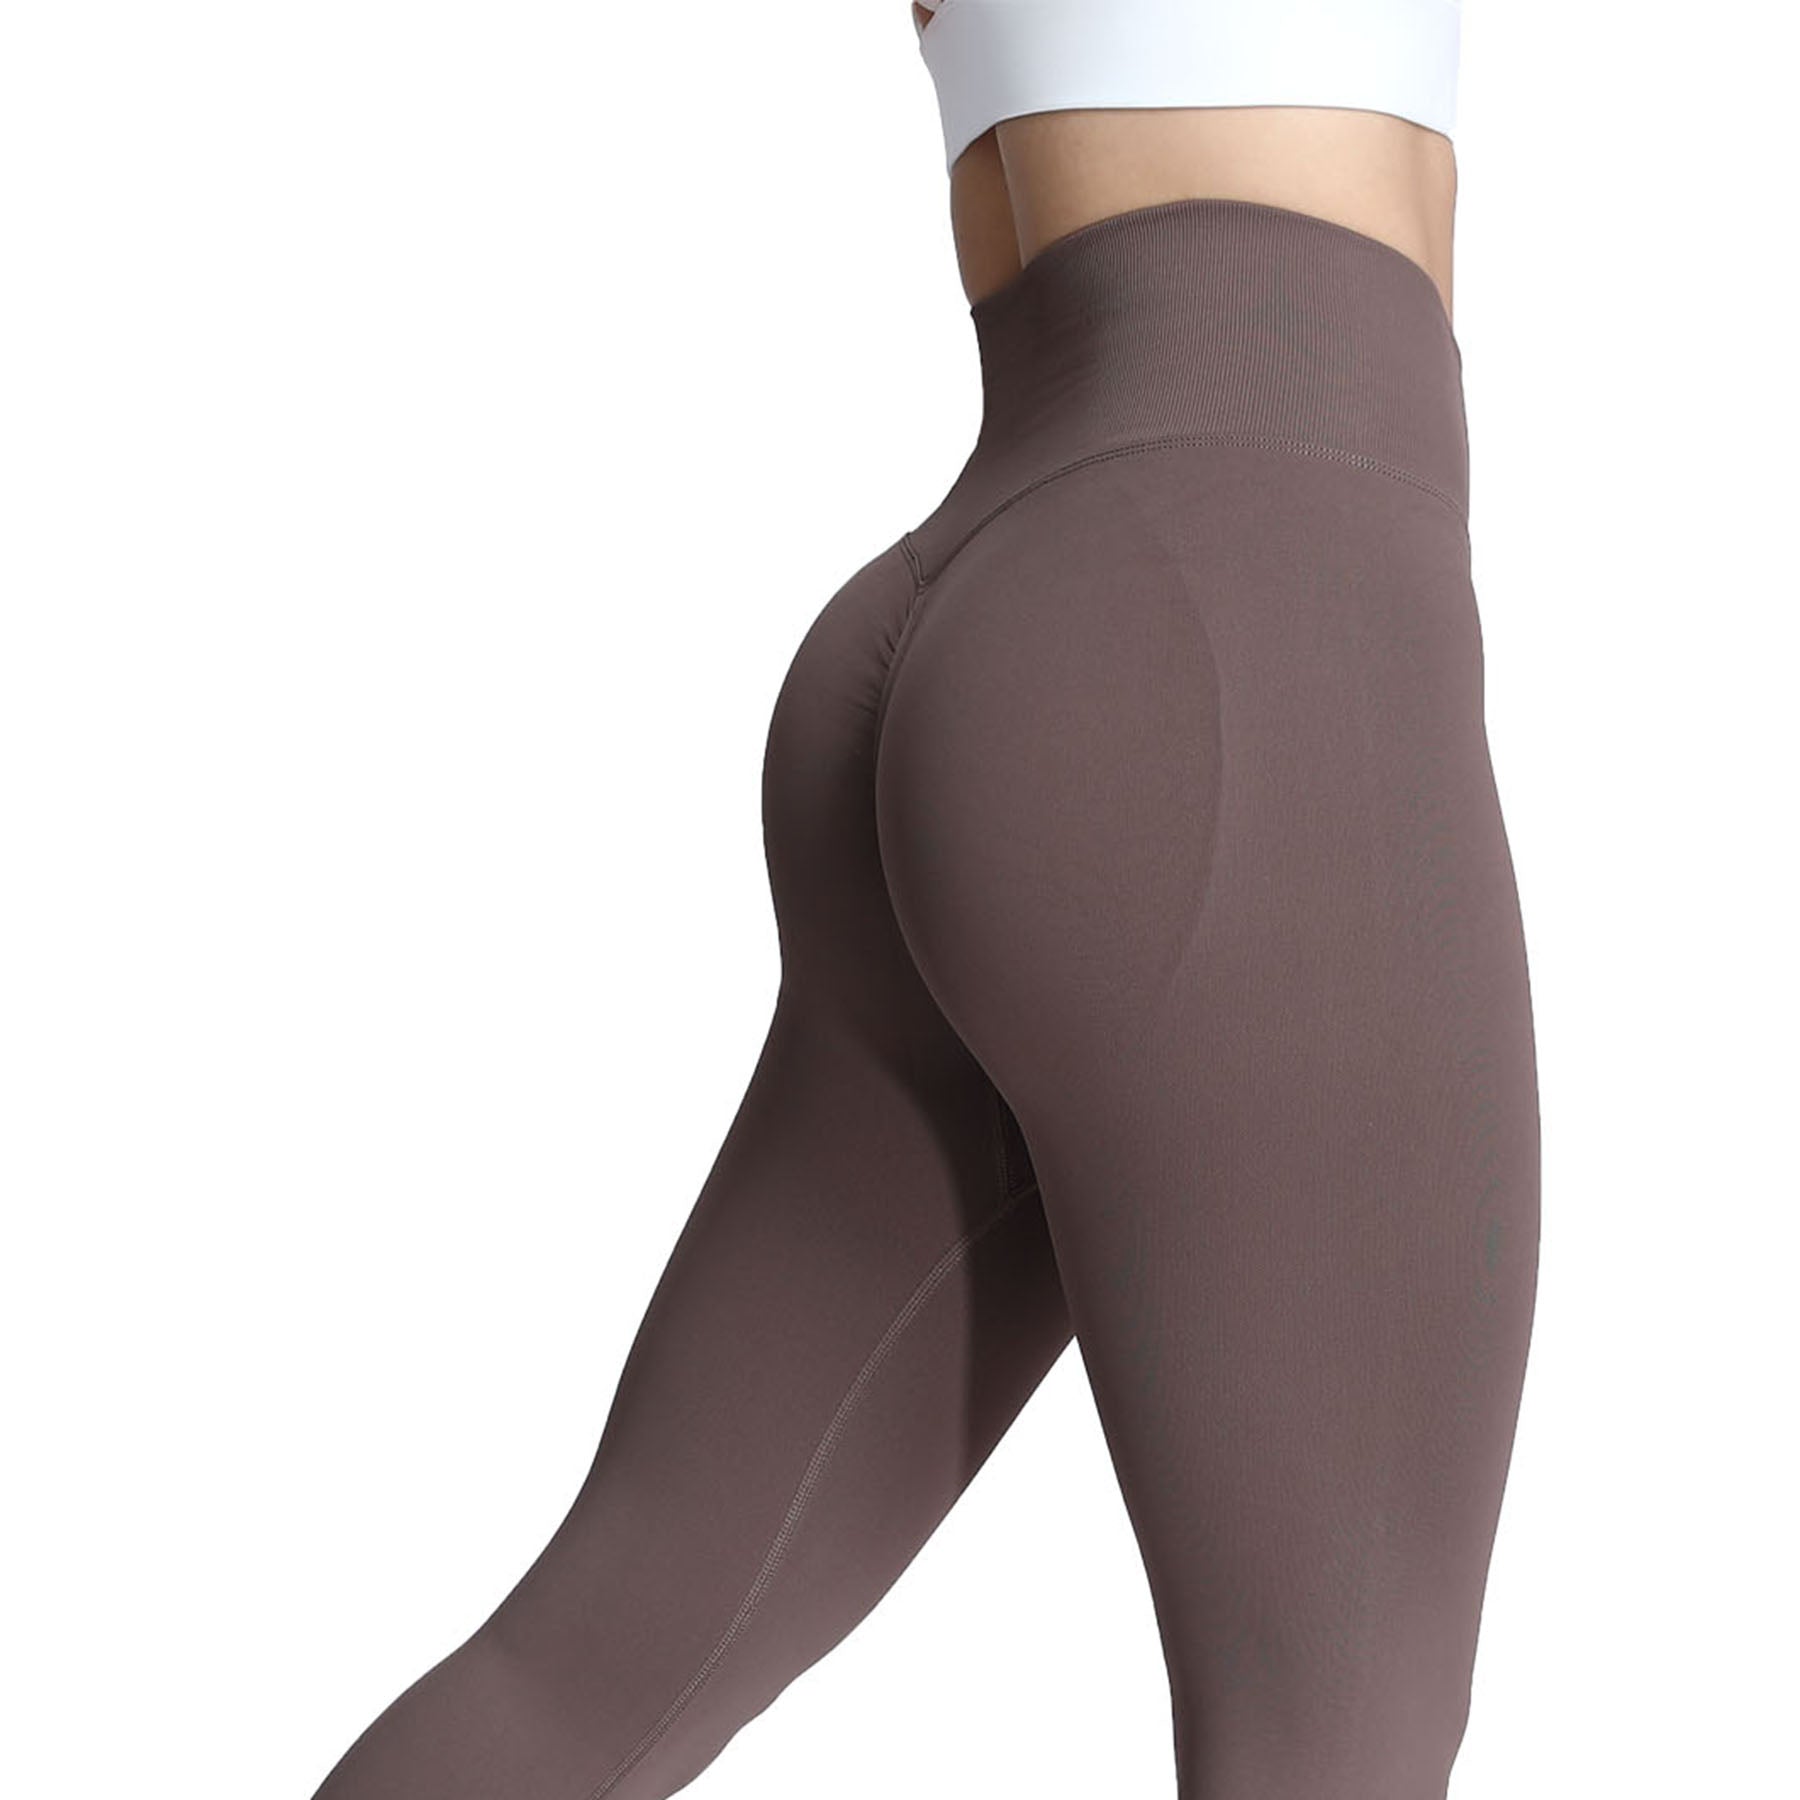 TRYING 'S BEST SEAMLESS BUM LIFTING LEGGINGS UNDER $25